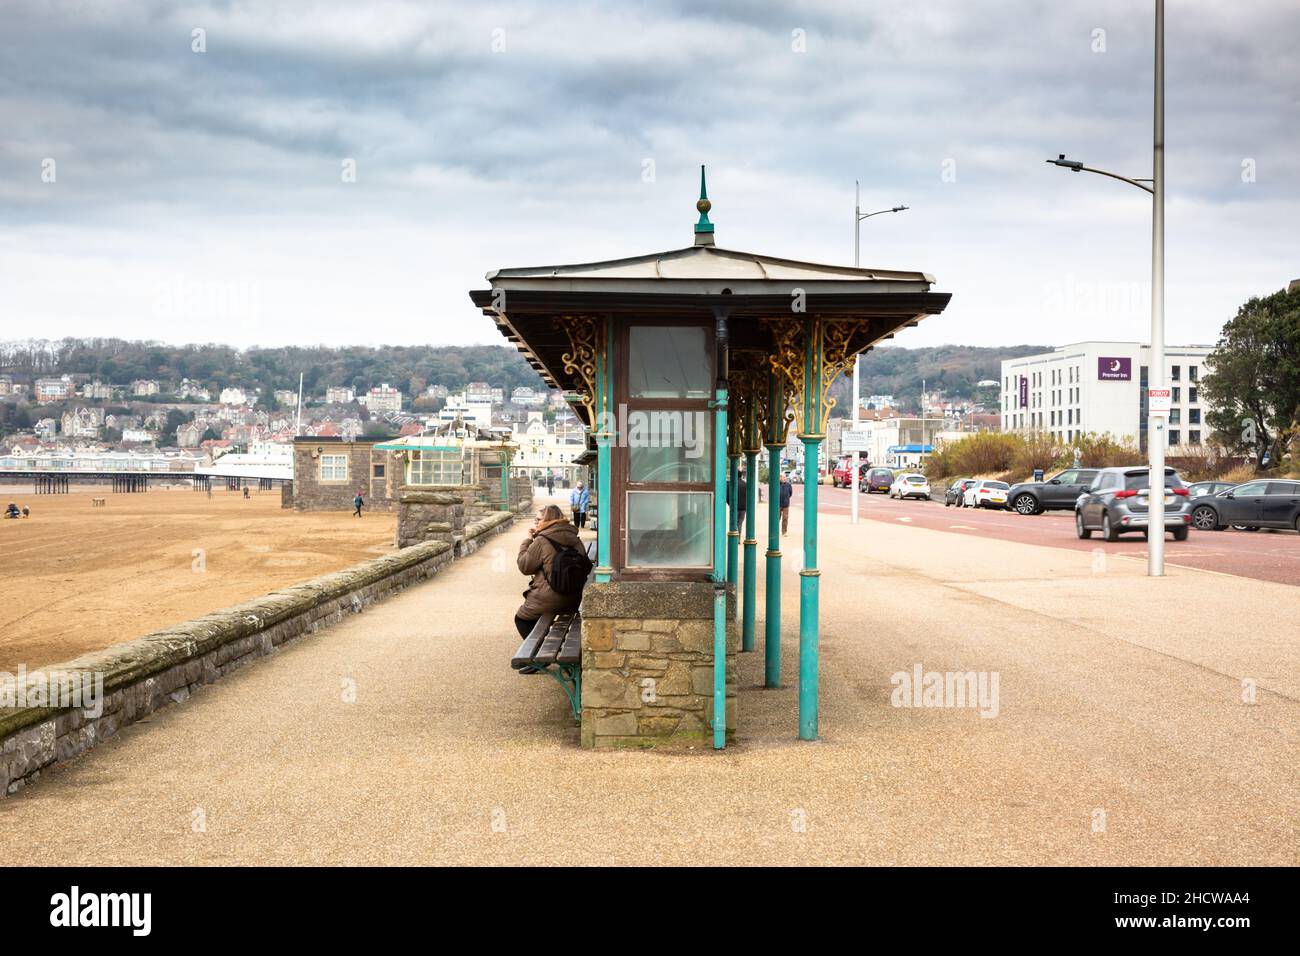 Seafront shelter, Weston-super-Mare, Somerset, 2021 Stock Photo